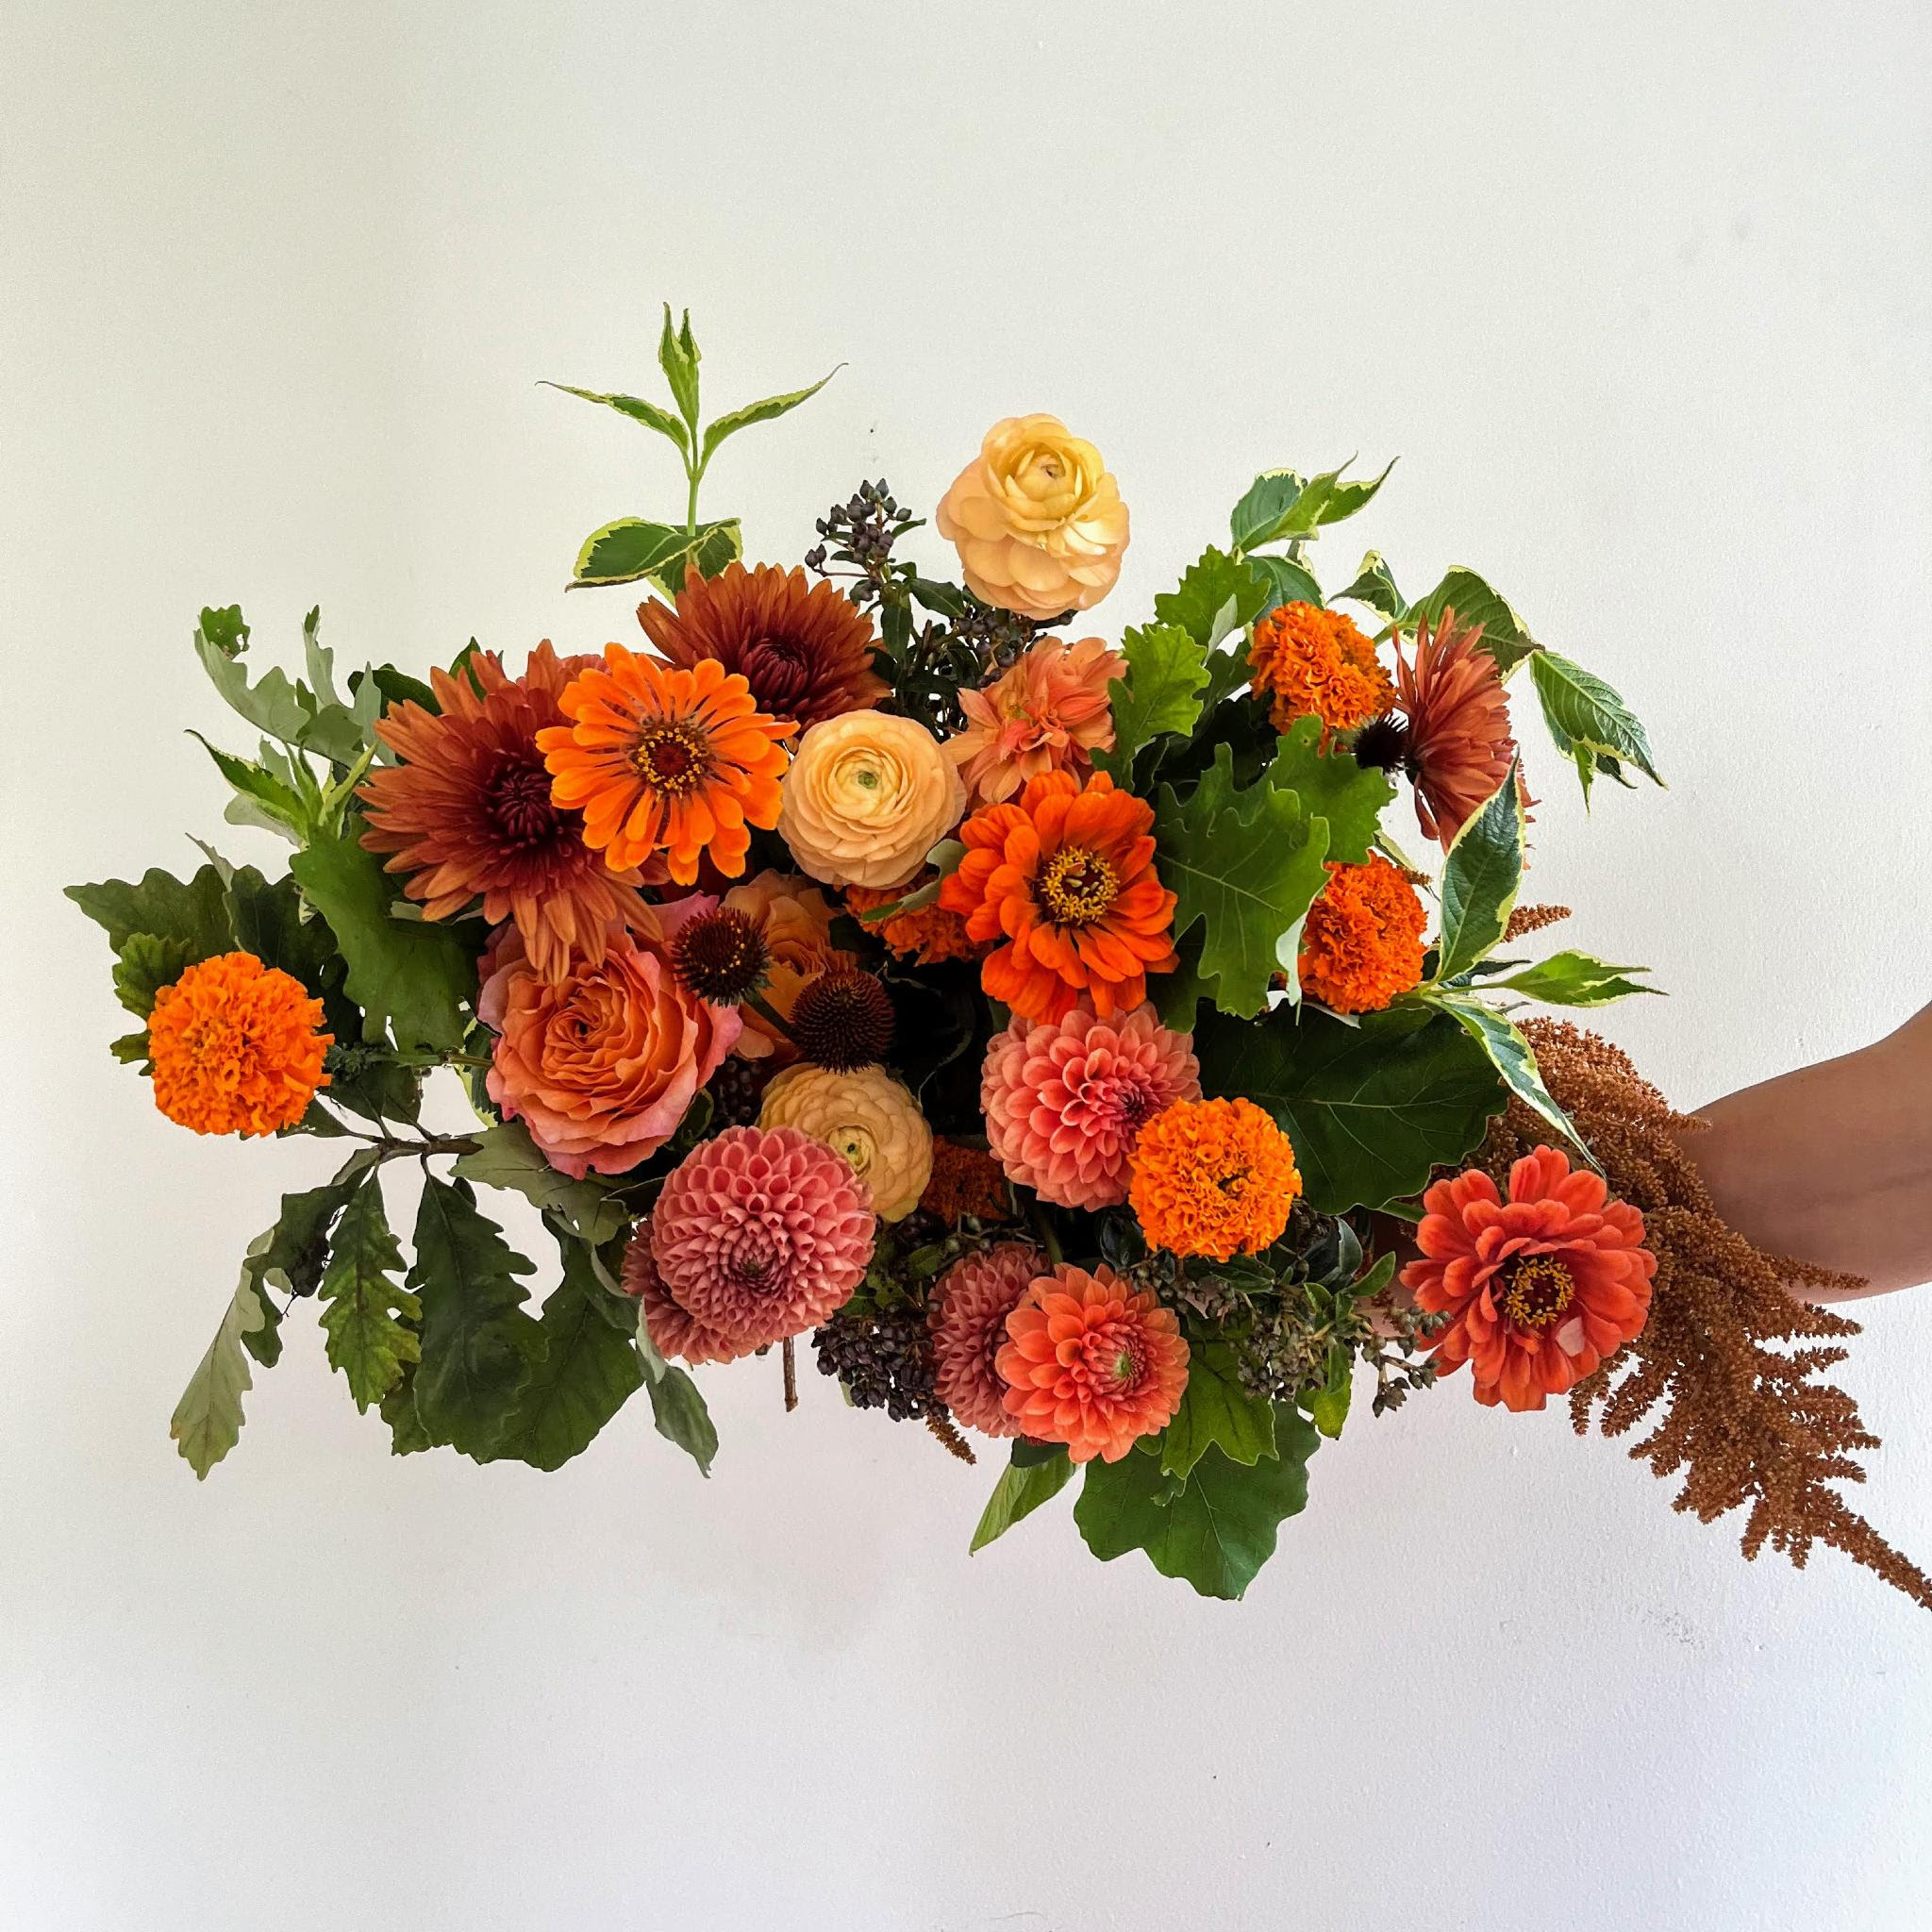 Persimmon and Spice Hand-Tied Bouquet